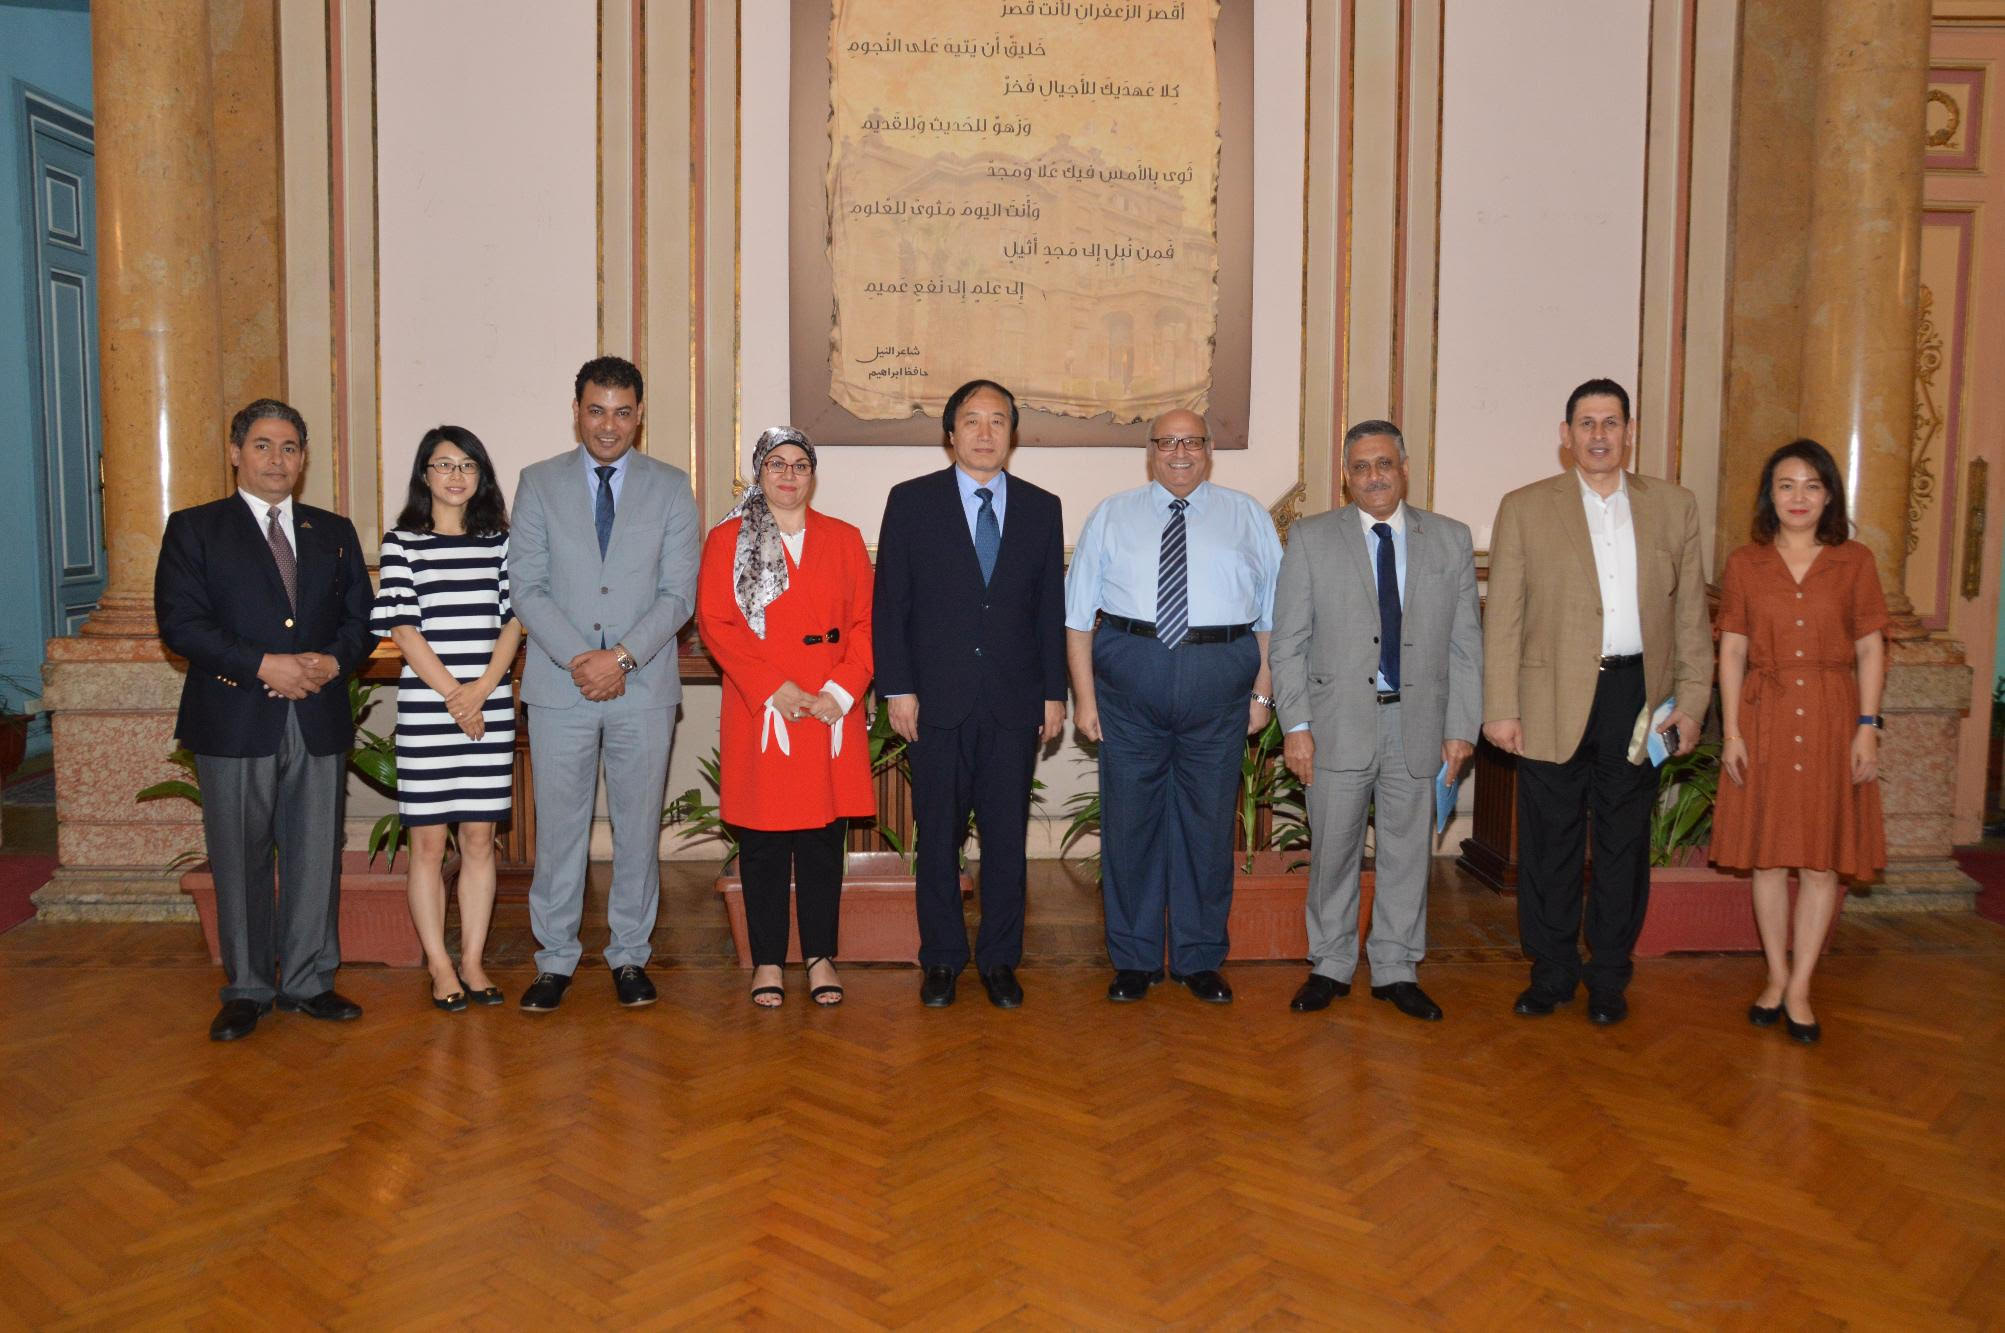 A high-level delegation from the People's University of Beijing visited Ain Shams University